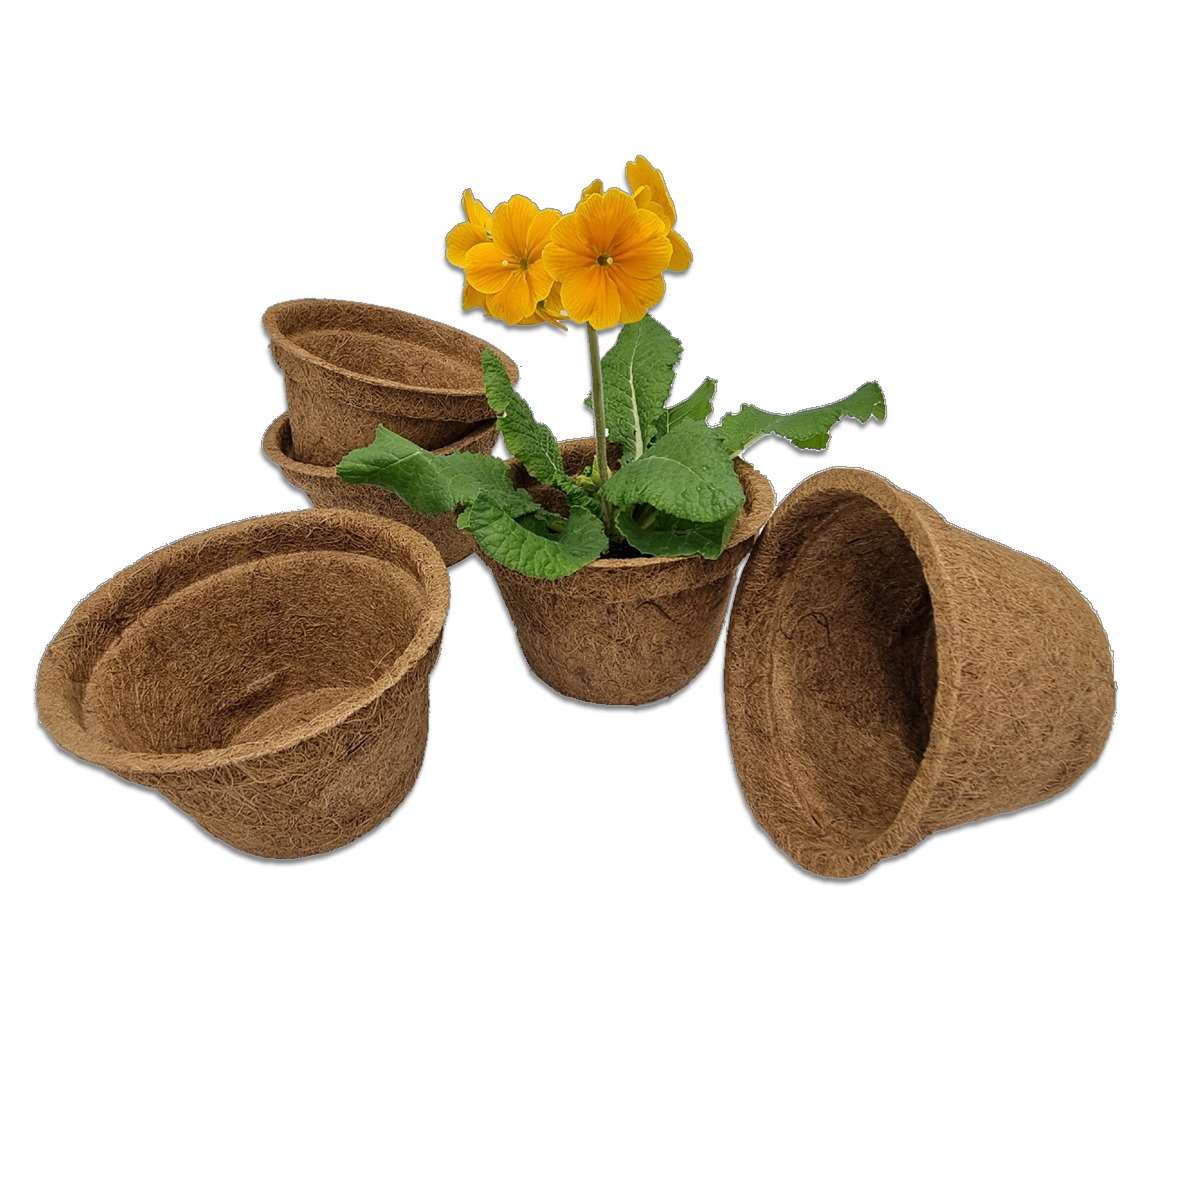 Biodegradable plant pots made from coir 14cm/1L